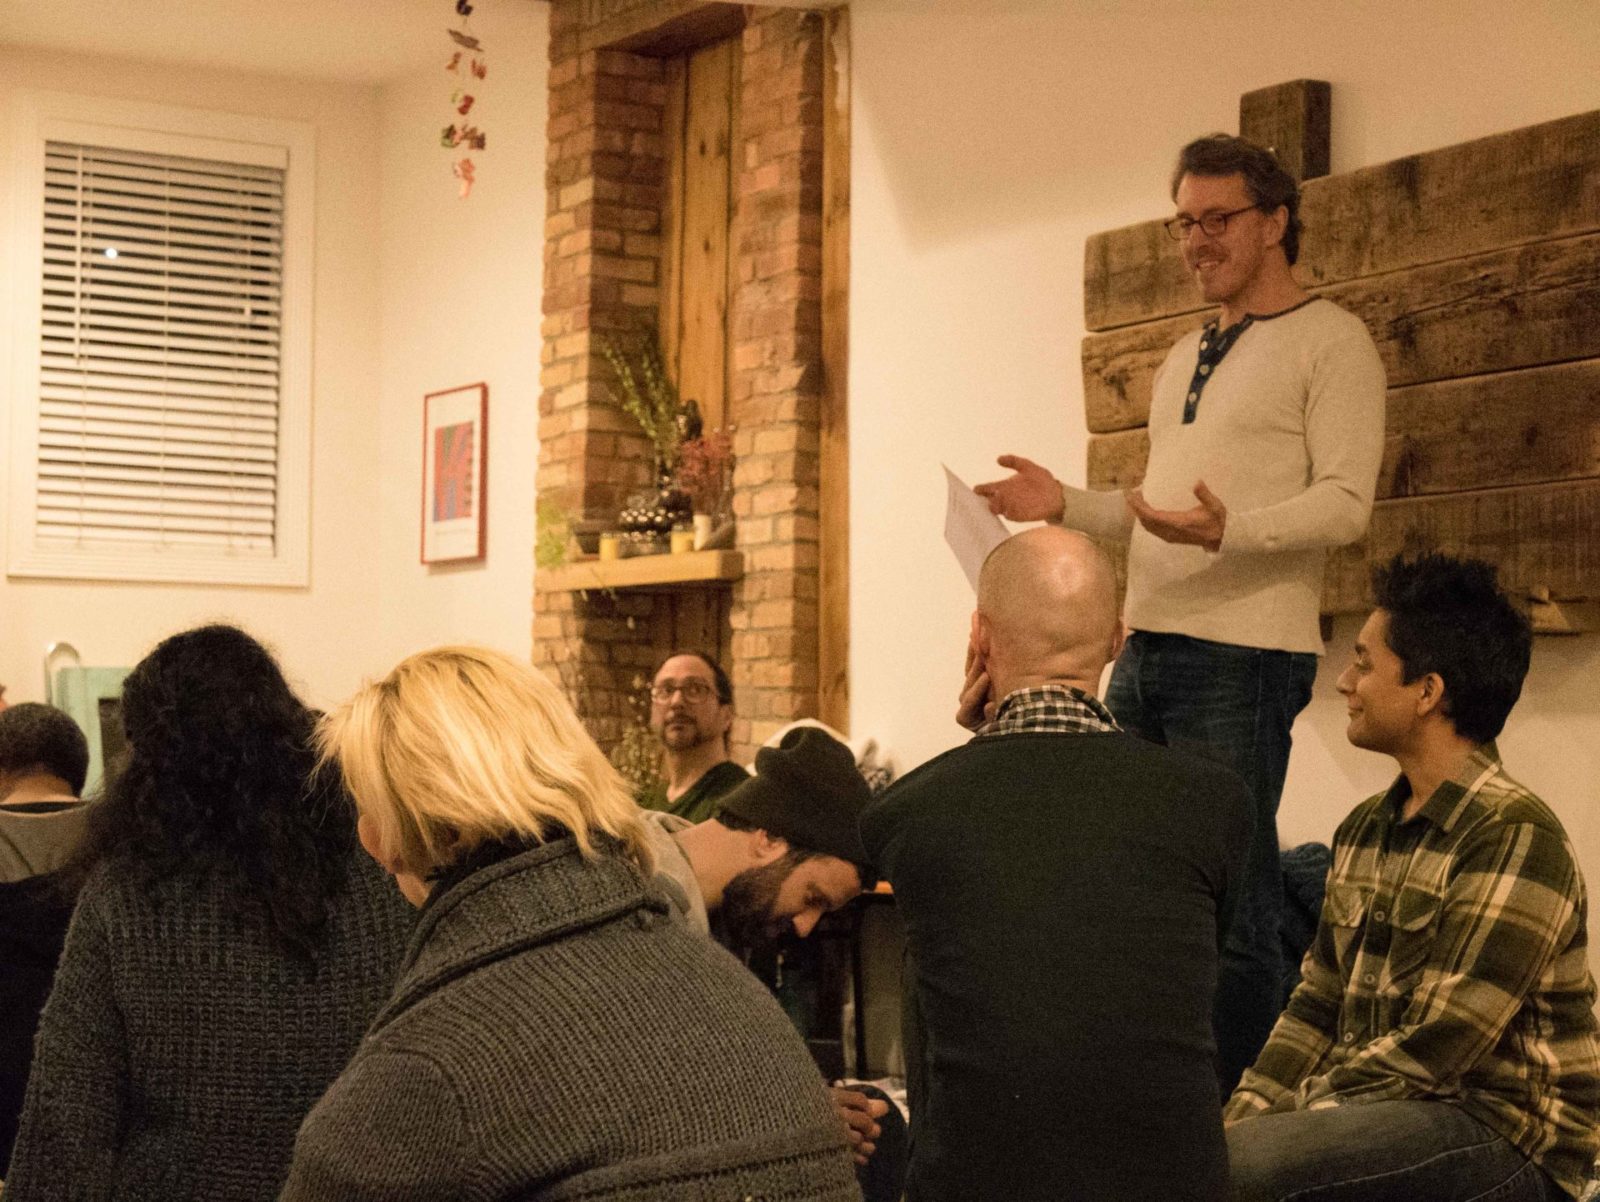 Colin Beavan speaking at his recent workshop, The Long Haul: Wisdom For Activists And Concerned Citizens